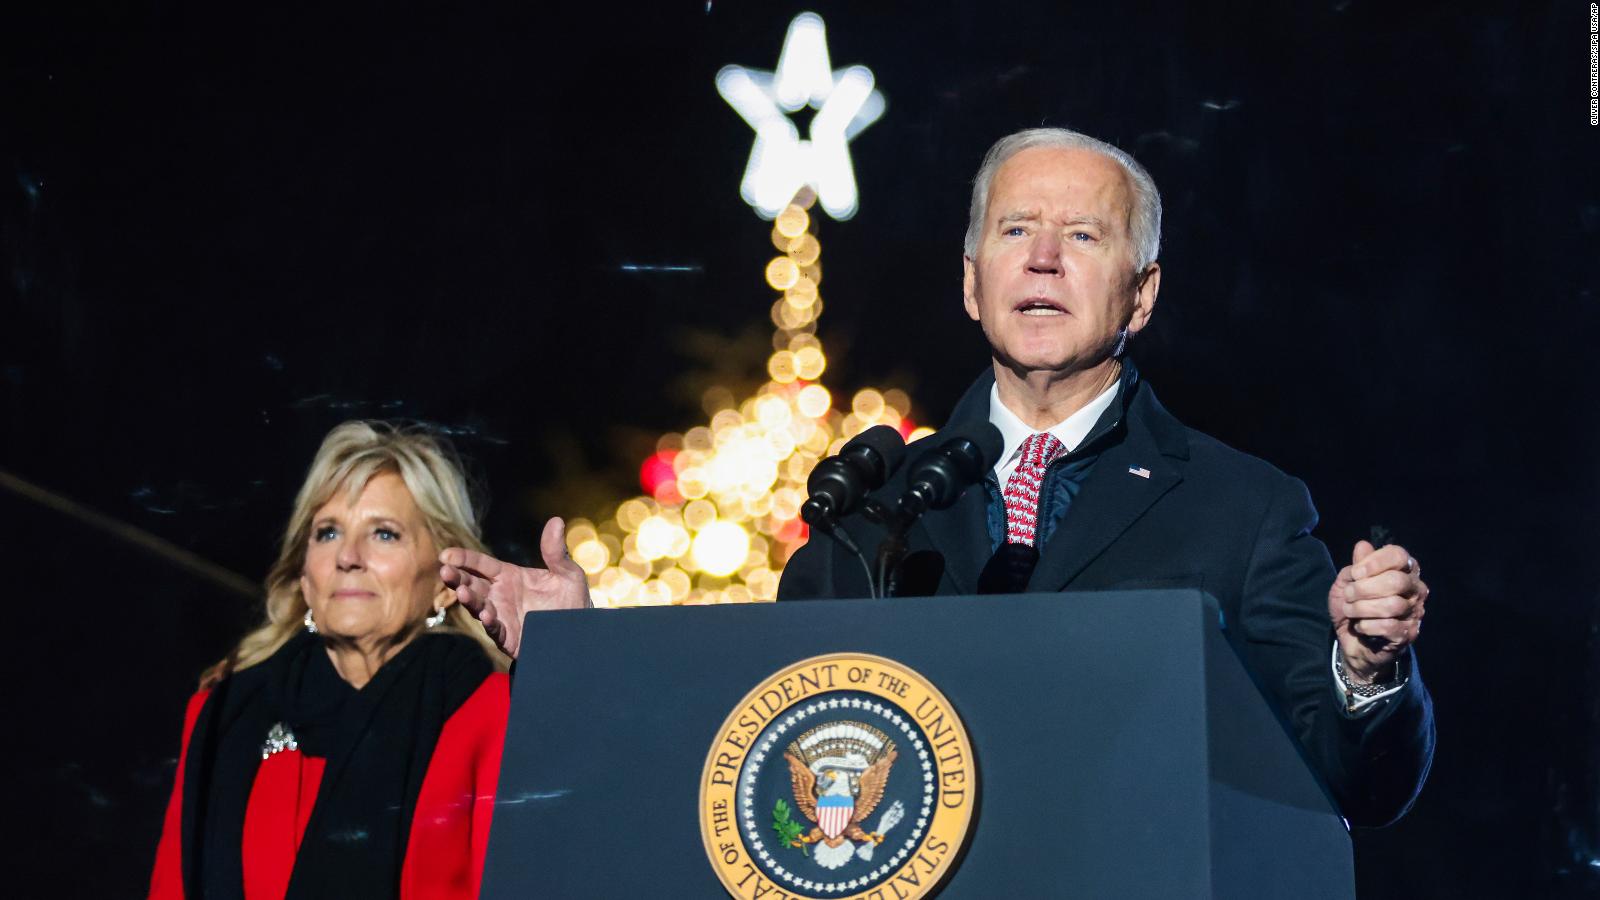 Biden tells Americans 'we have so much ahead of us' during National